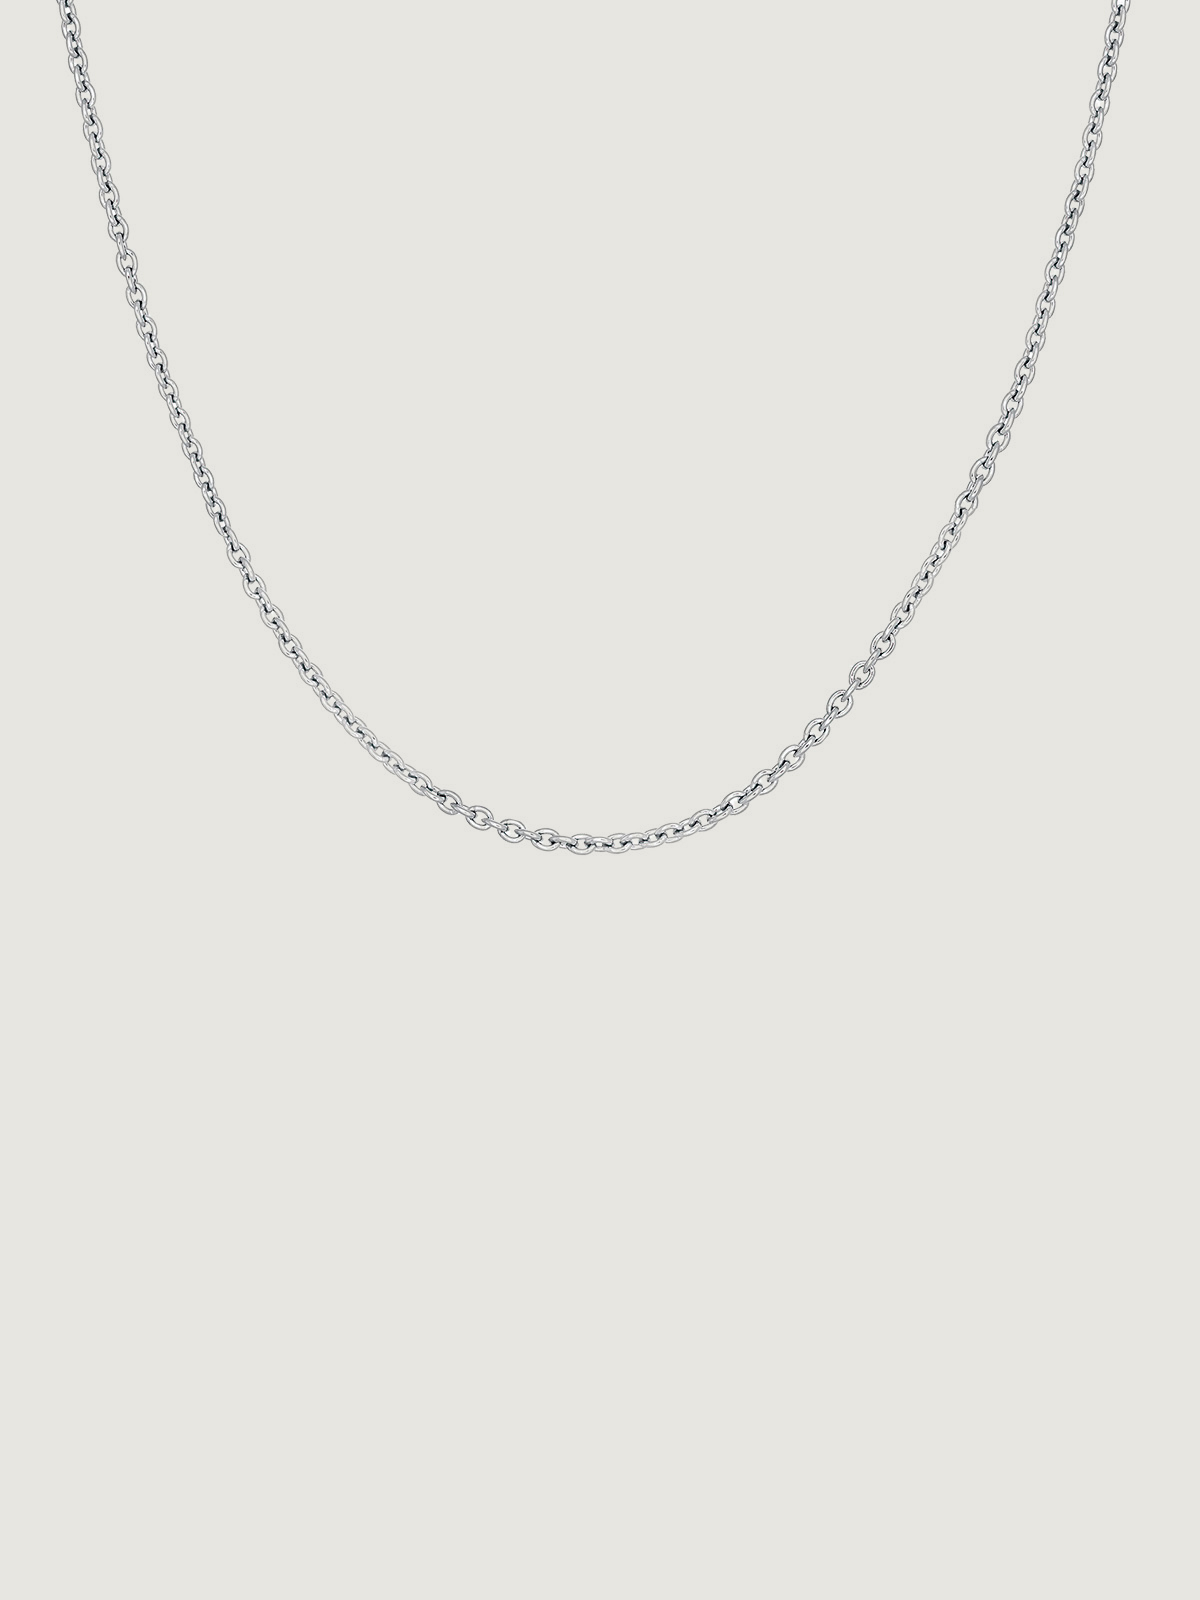 Adjustable simple 925 silver chain.